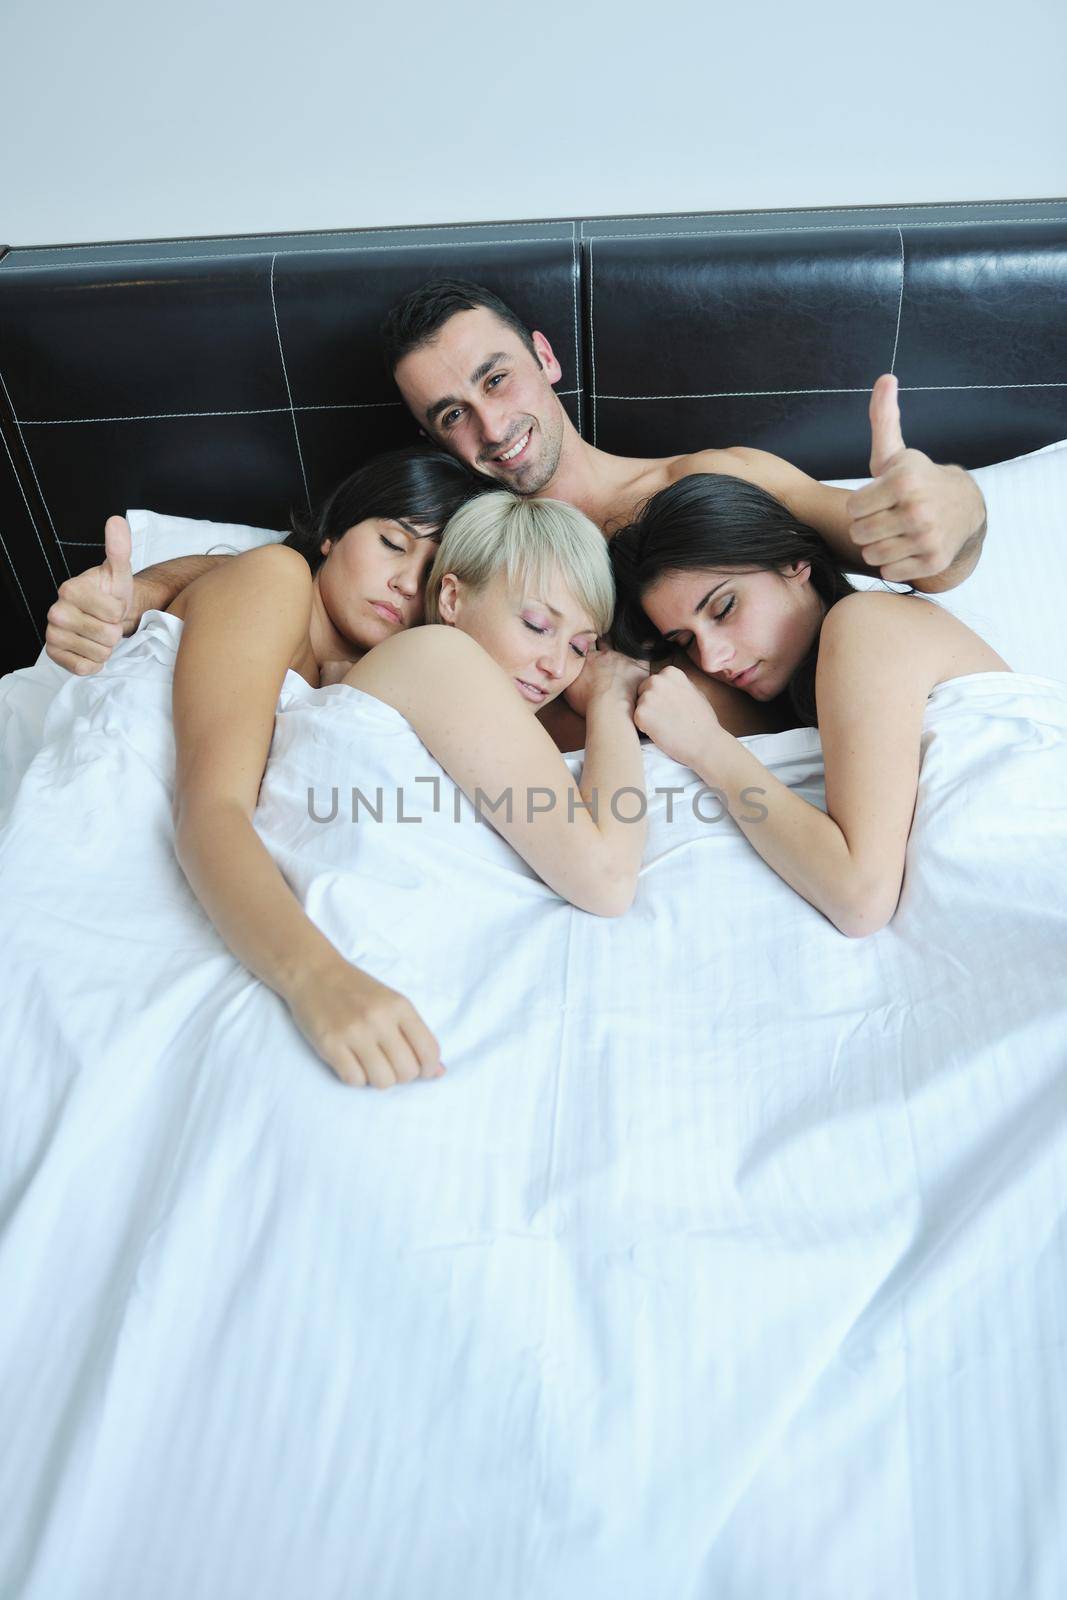 successful Young handsome man lying in bed with three sleeping girls